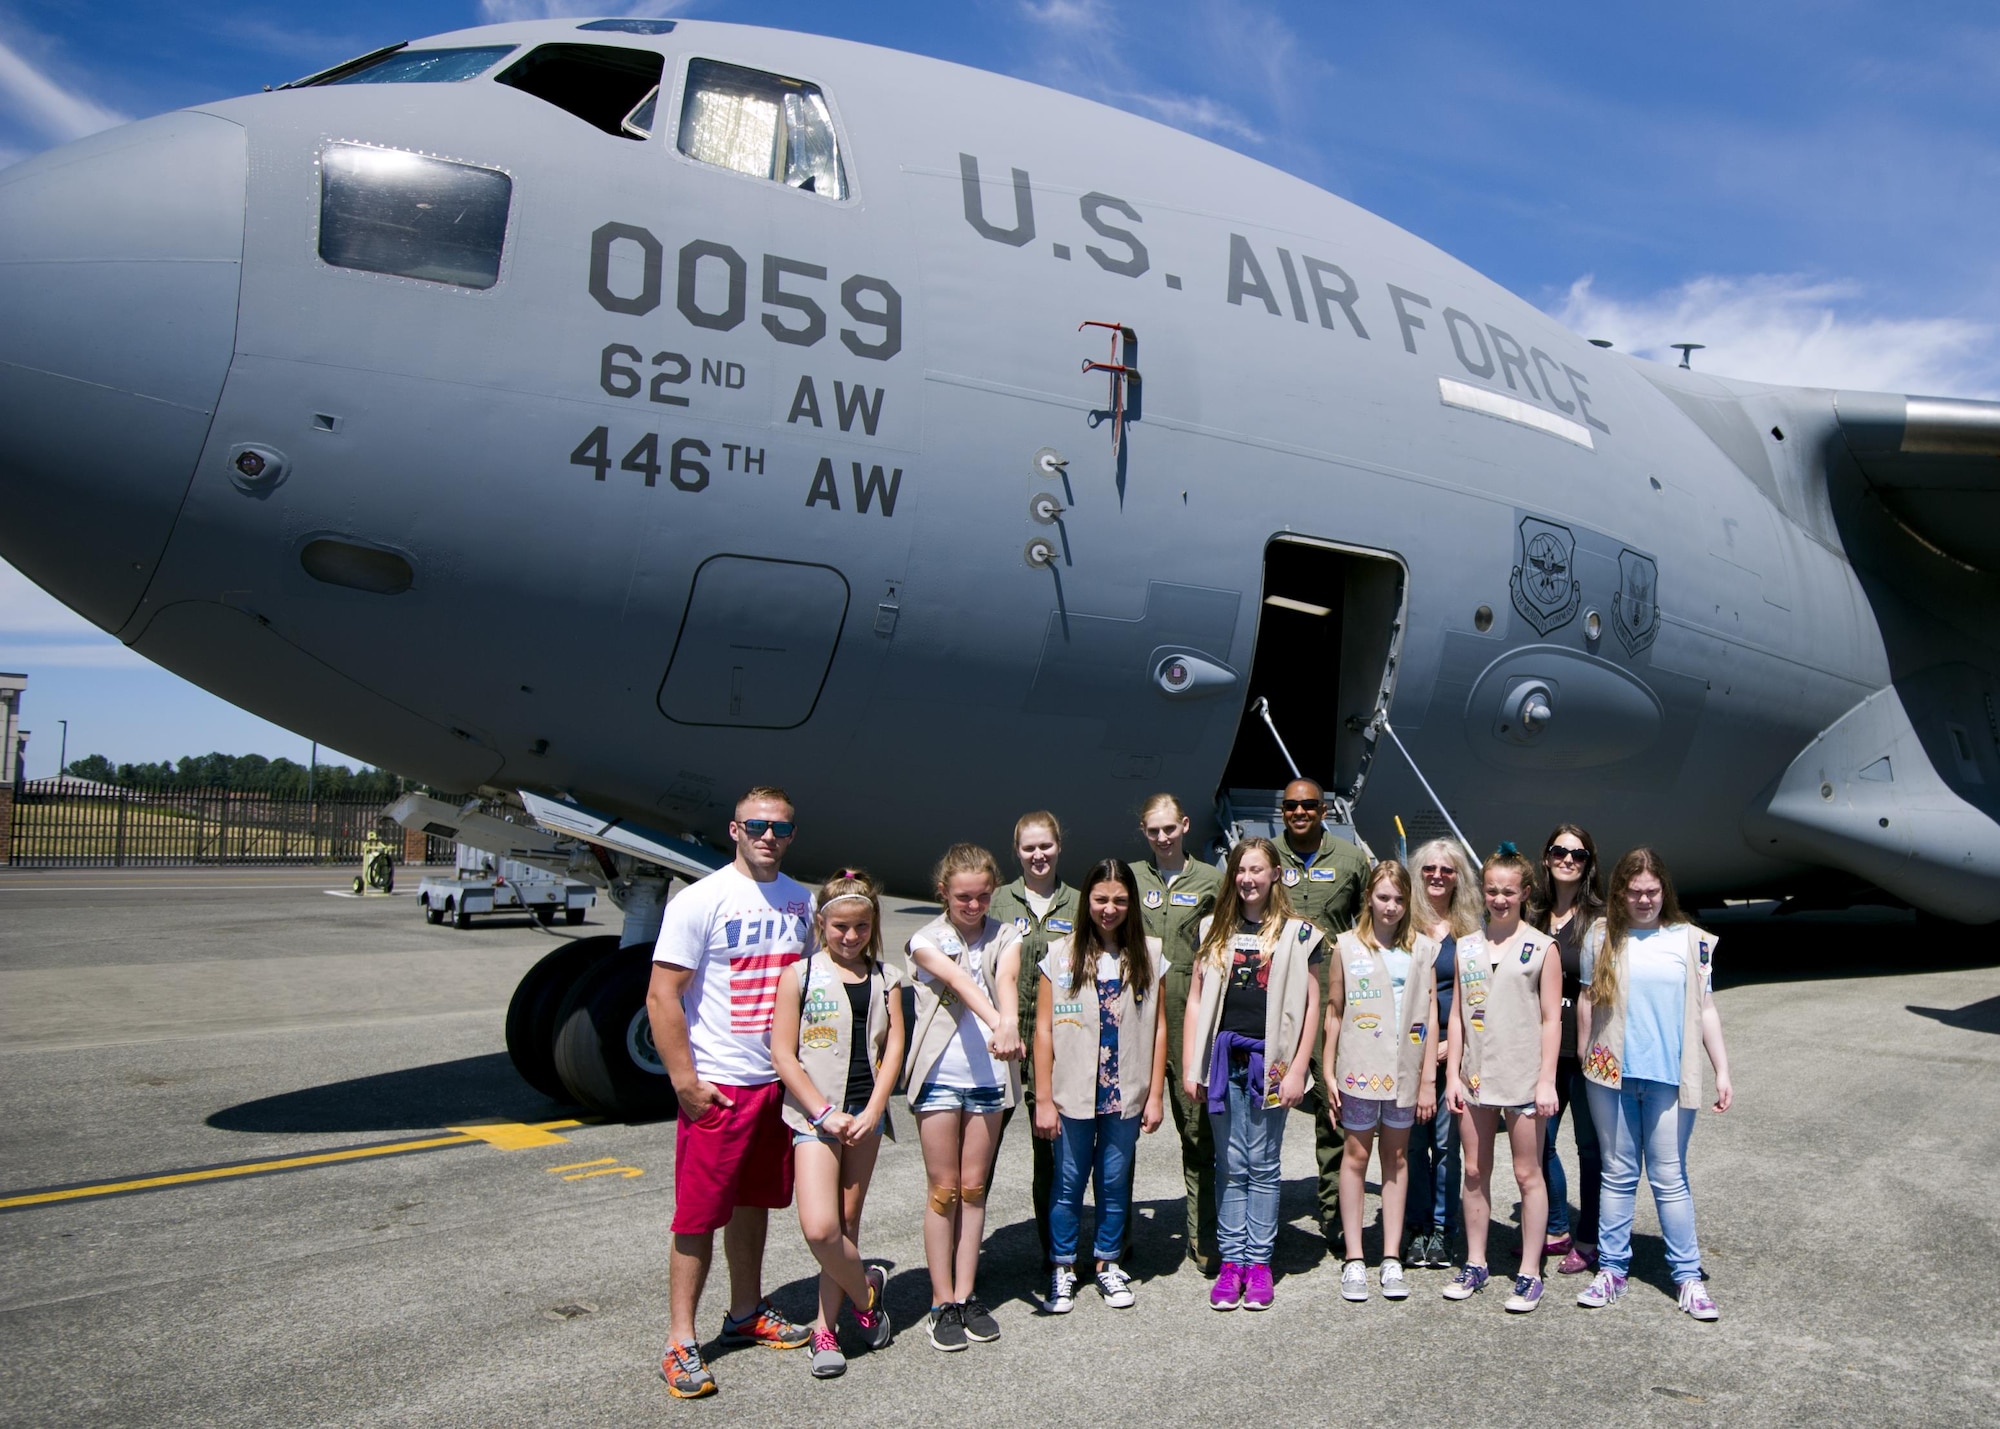 Members of the 446th Airlift Wing and a local Girl Scout troop pose in front of a C-17 Globemaster III at McChord Field July 9, 2017, during a tour of the base. During the visit, several girl scouts were able to tour the 446th AW, a C-17, control tower, and learned survival tips from a Survival, Evasion, Resistance and Escape, instructor. (U.S. Air Force photo by Tech. Sgt. Bryan Hull)